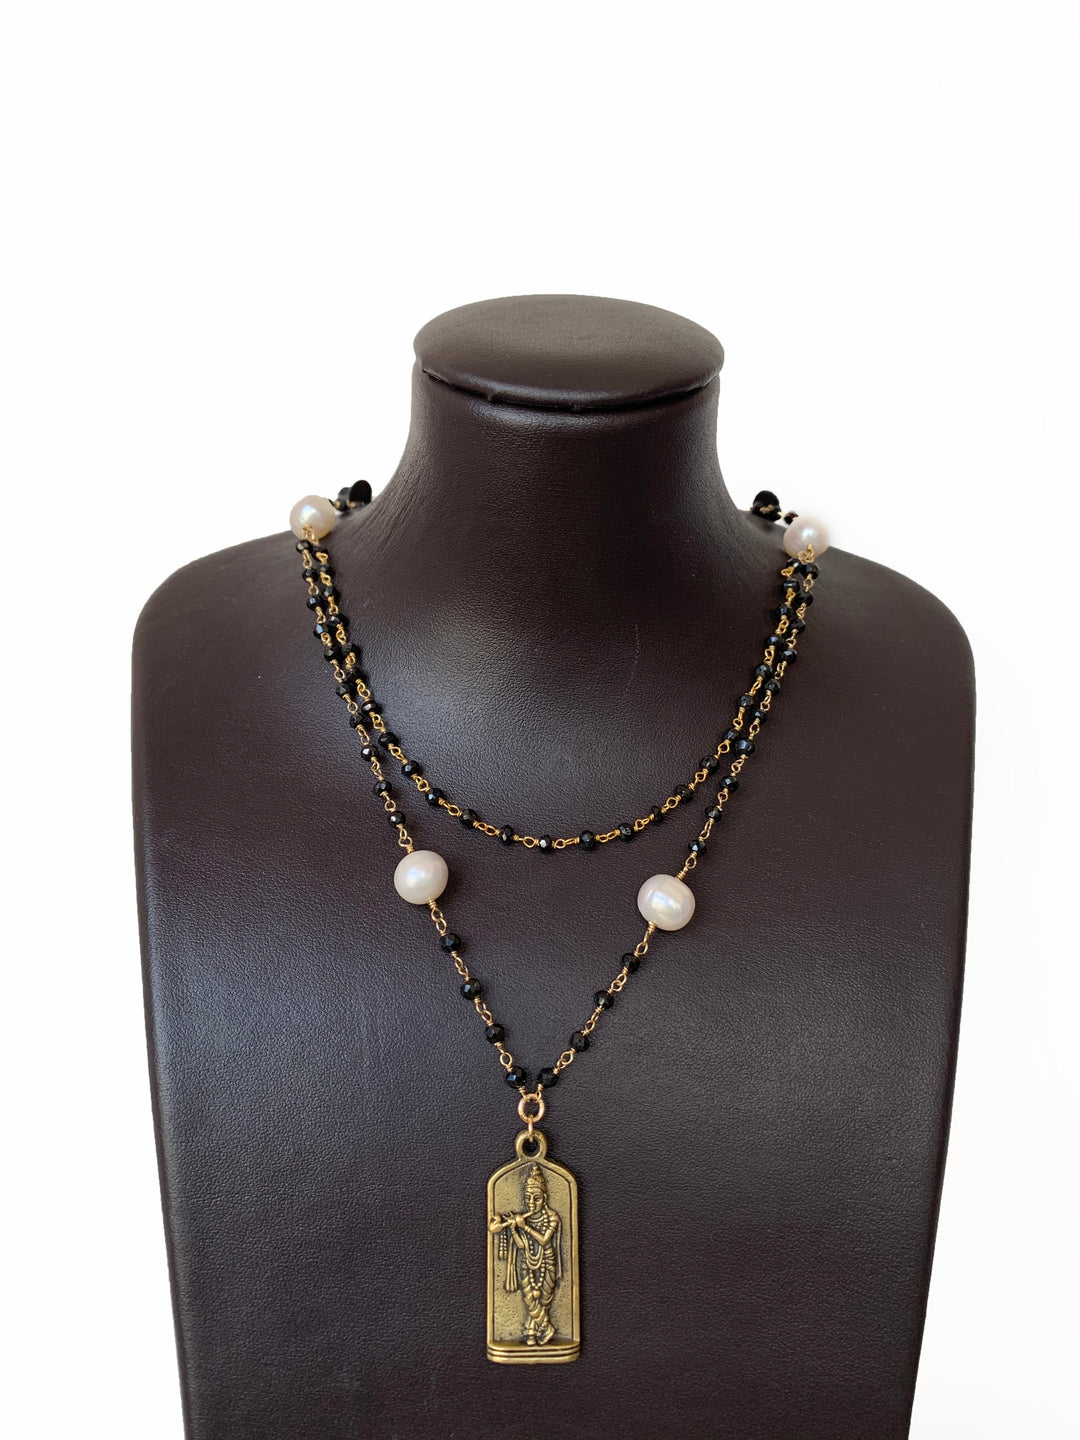 Onyx & Pearl Necklace With Buddha - Kingfisher Road - Online Boutique